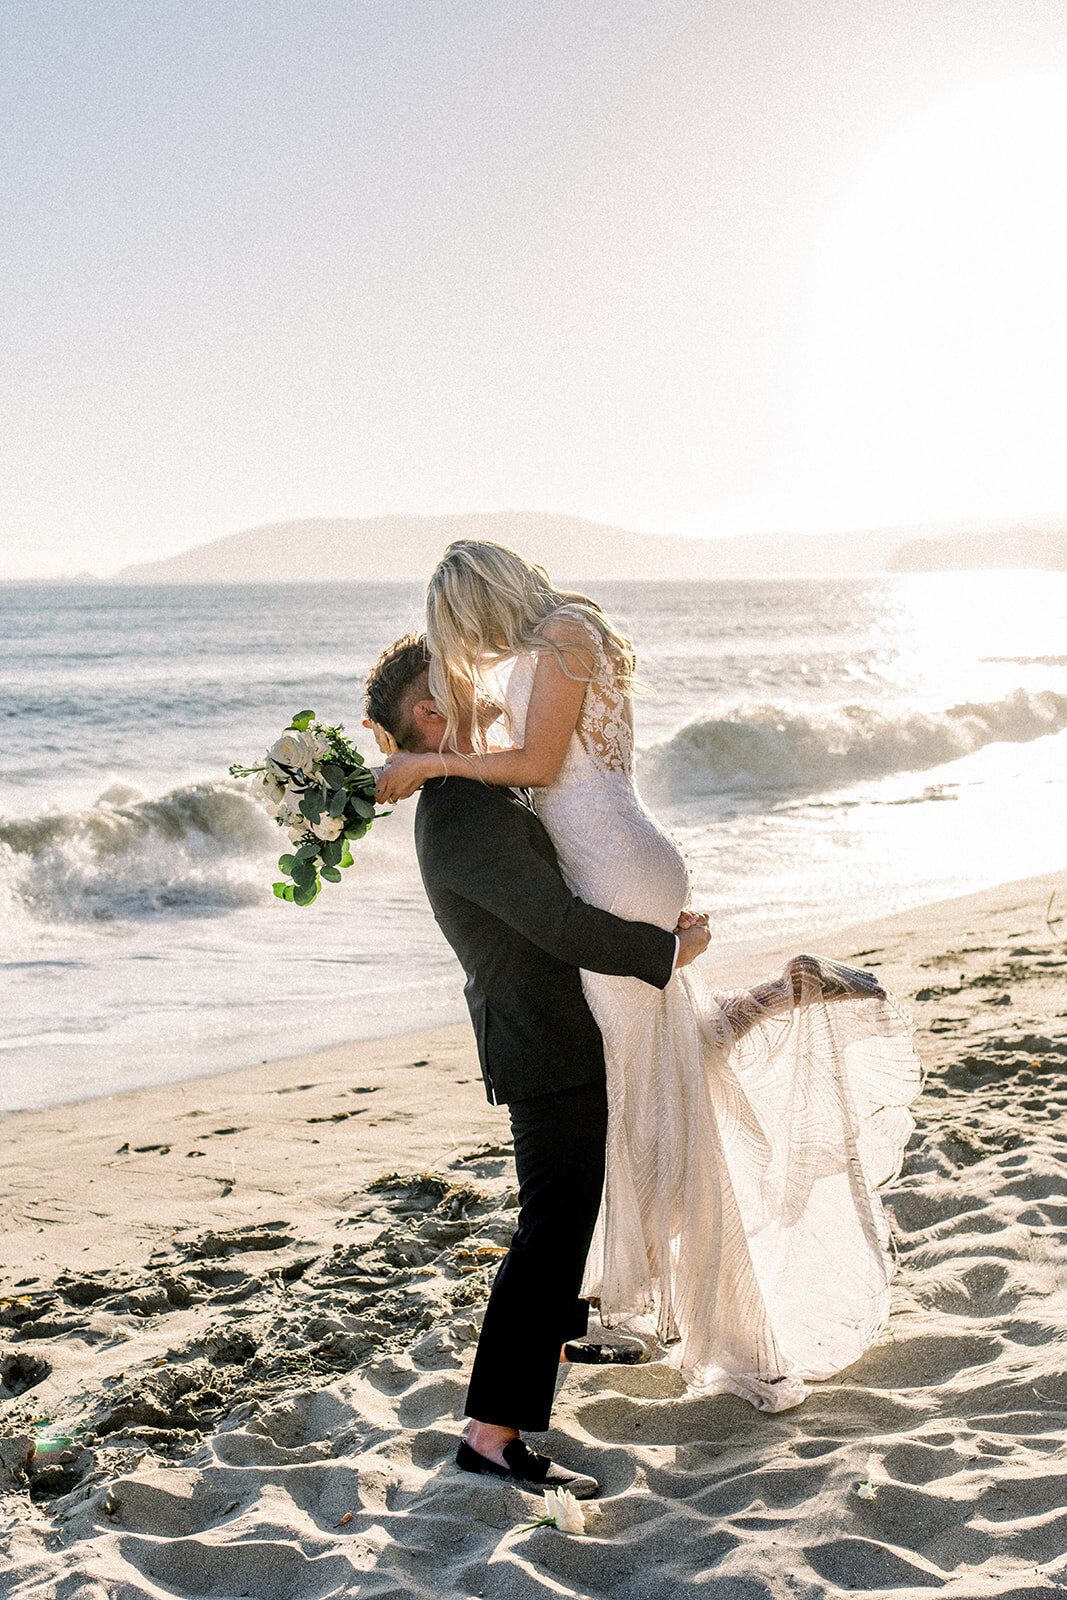 This captivating beach wedding scene at Dolphin Bay Resort in Pismo Beach, CA, is beautifully immortalized by Tiffany Longeway, highlighting the joy and serenity of a seaside ceremony.